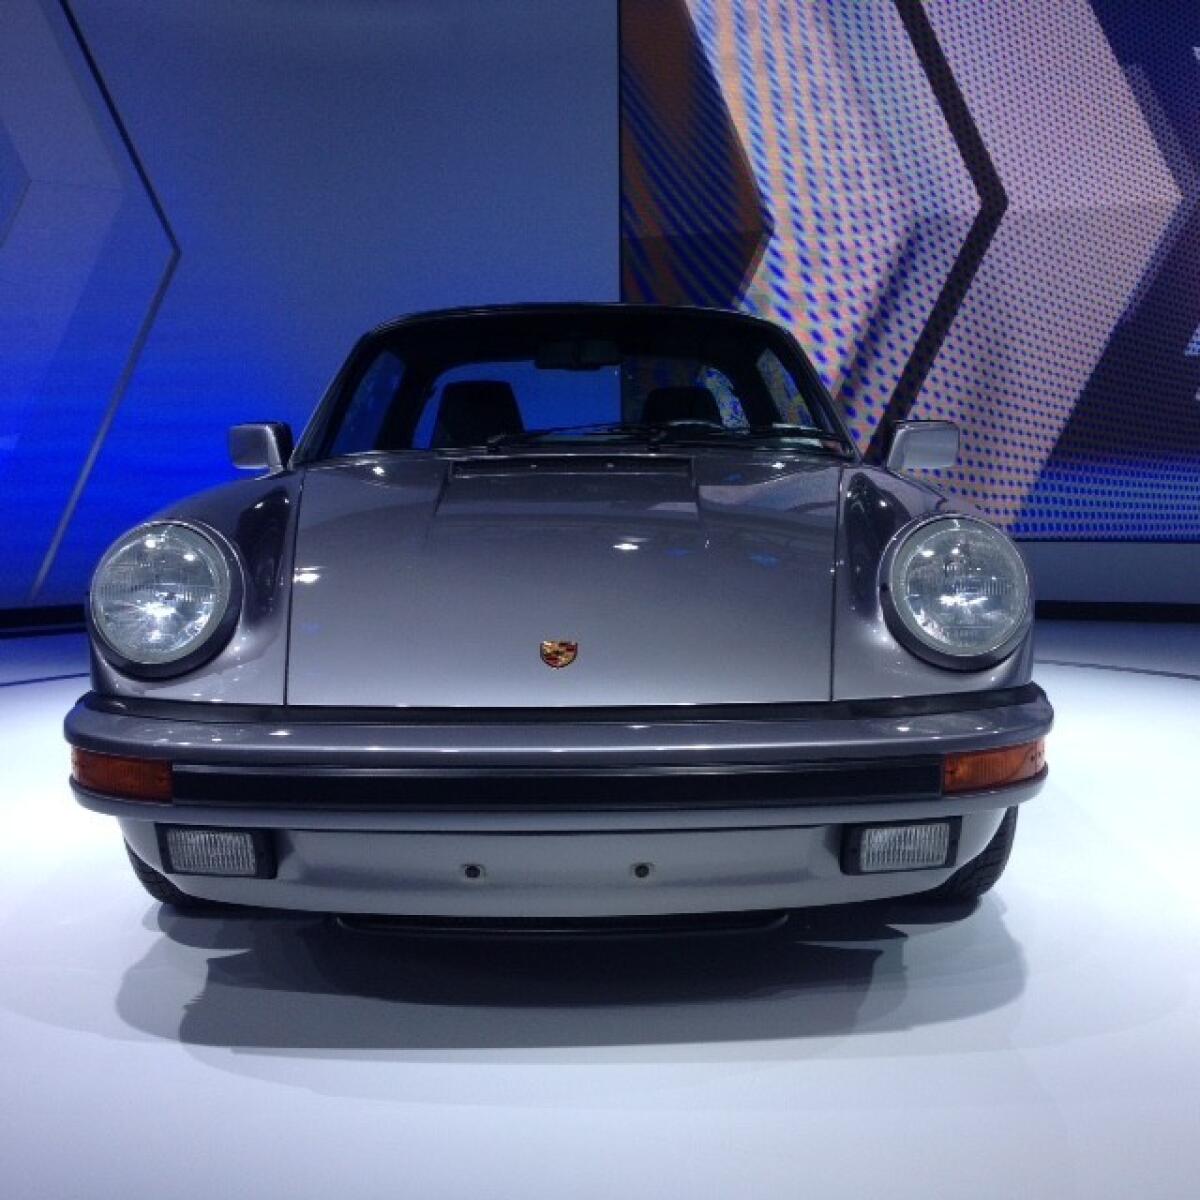 Porsche always seems to bring one or two of its classics to the L.A. Auto Show. This year, the automaker brought a medium gray 1988 Targa top 911.